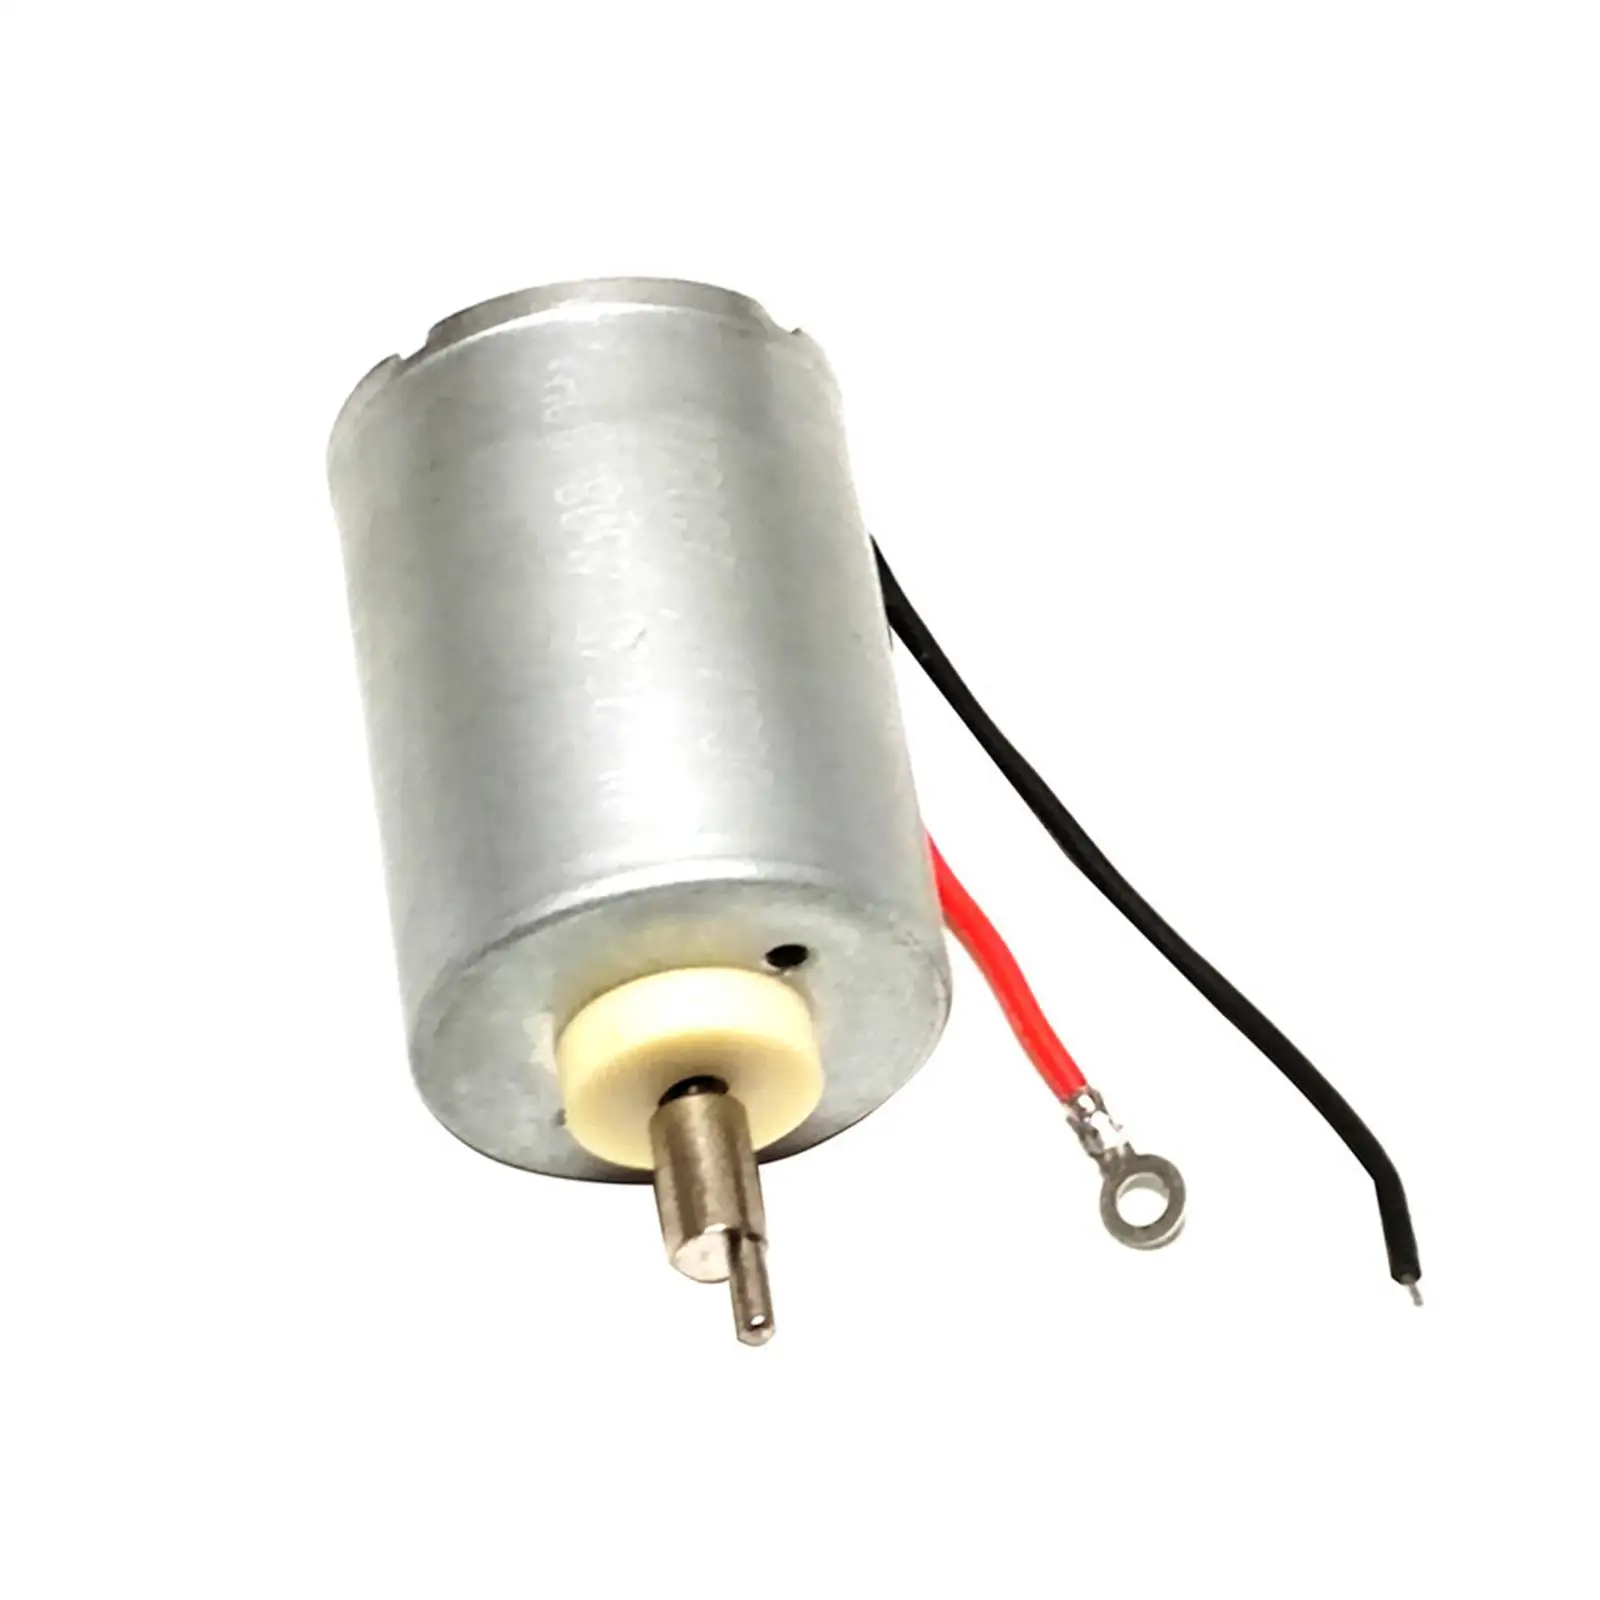 Motor for Hair Clippers Upgrade Maintenance High Performance Repair Parts DC 3.7V Brushless Motor for 8148 8509 1919 8504 8591